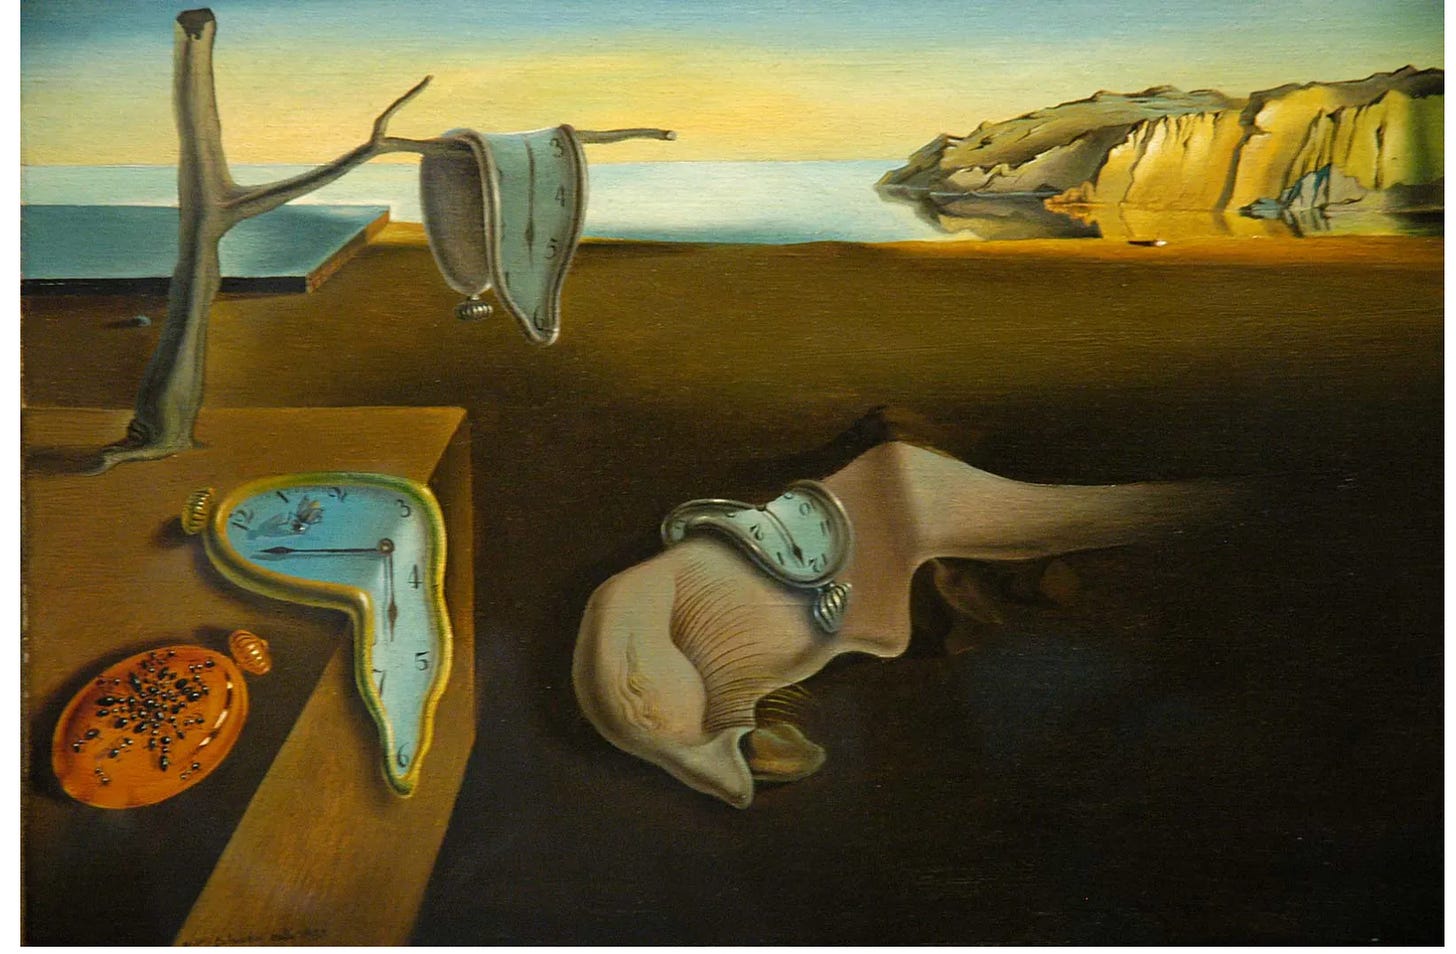 Salvador Dalí’s “The Persistence of Memory” surrealist painting shows melting clocks, a stopwatch crawling with ants, a dead tree, part of a melted face over a rock and cliffs and water in the background in muted earth tones.